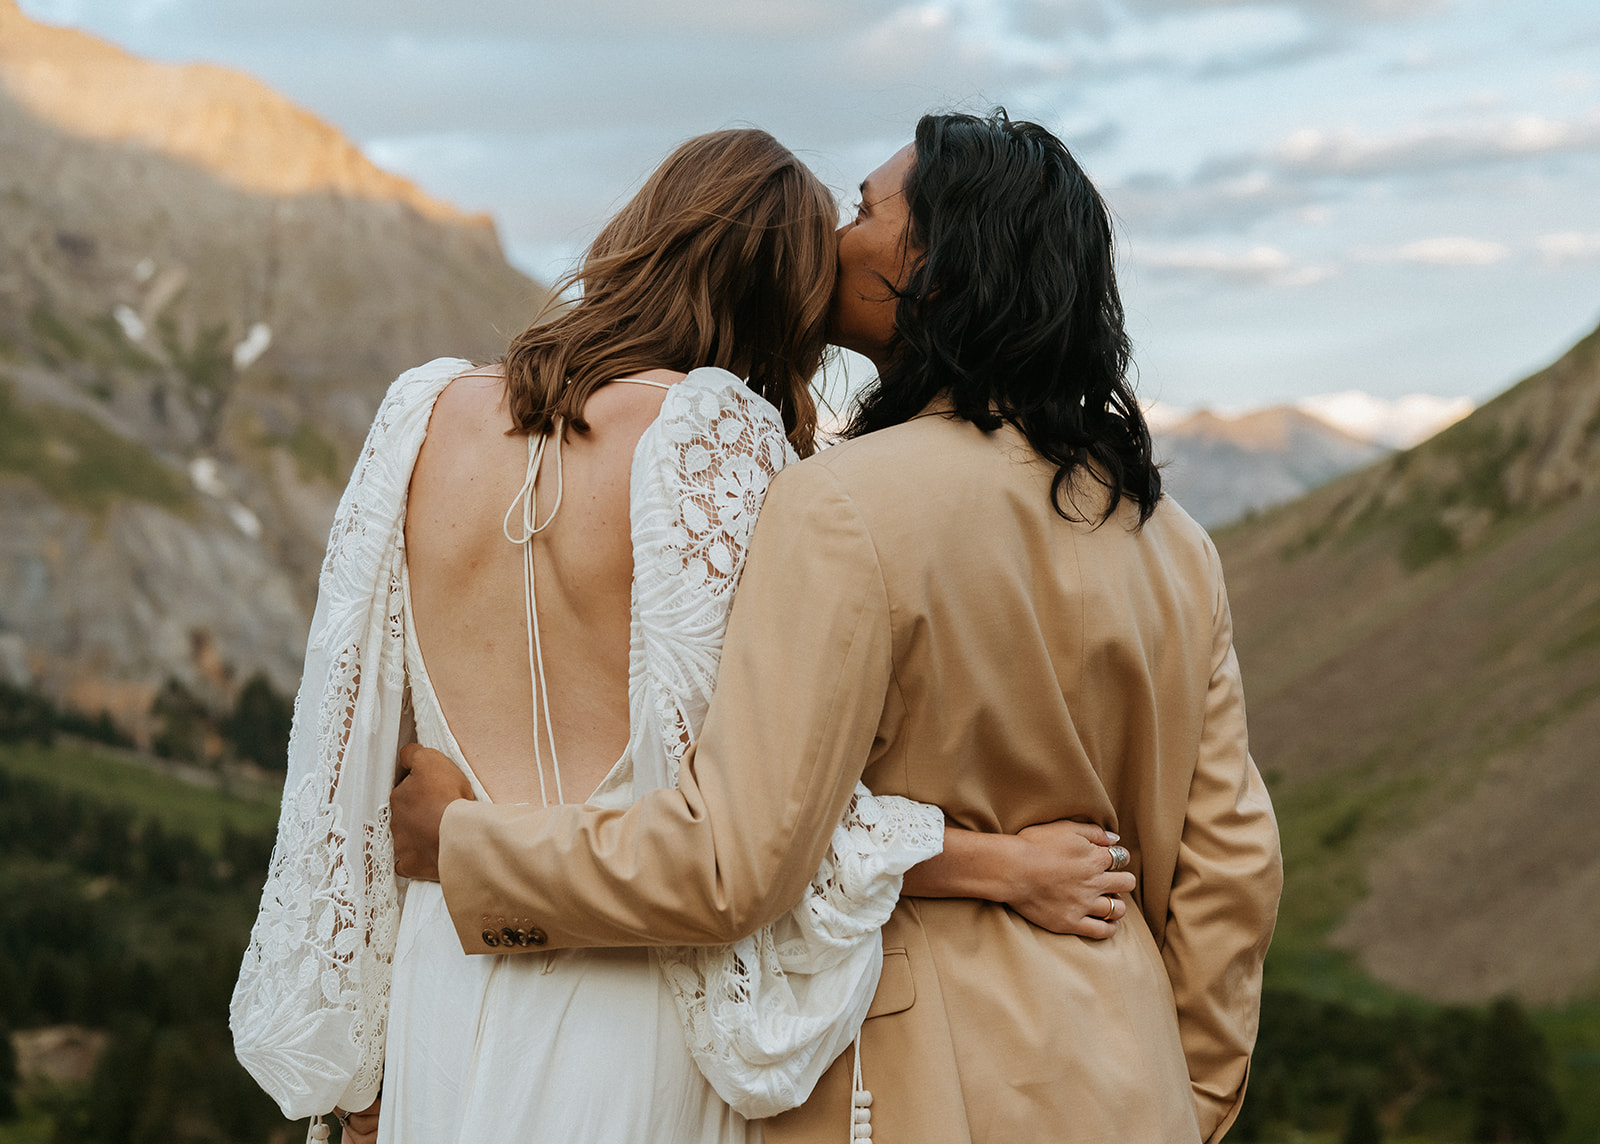 A groom in a tan suit kisses the cheek of his bride in a lace dress during their Ouray Elopement